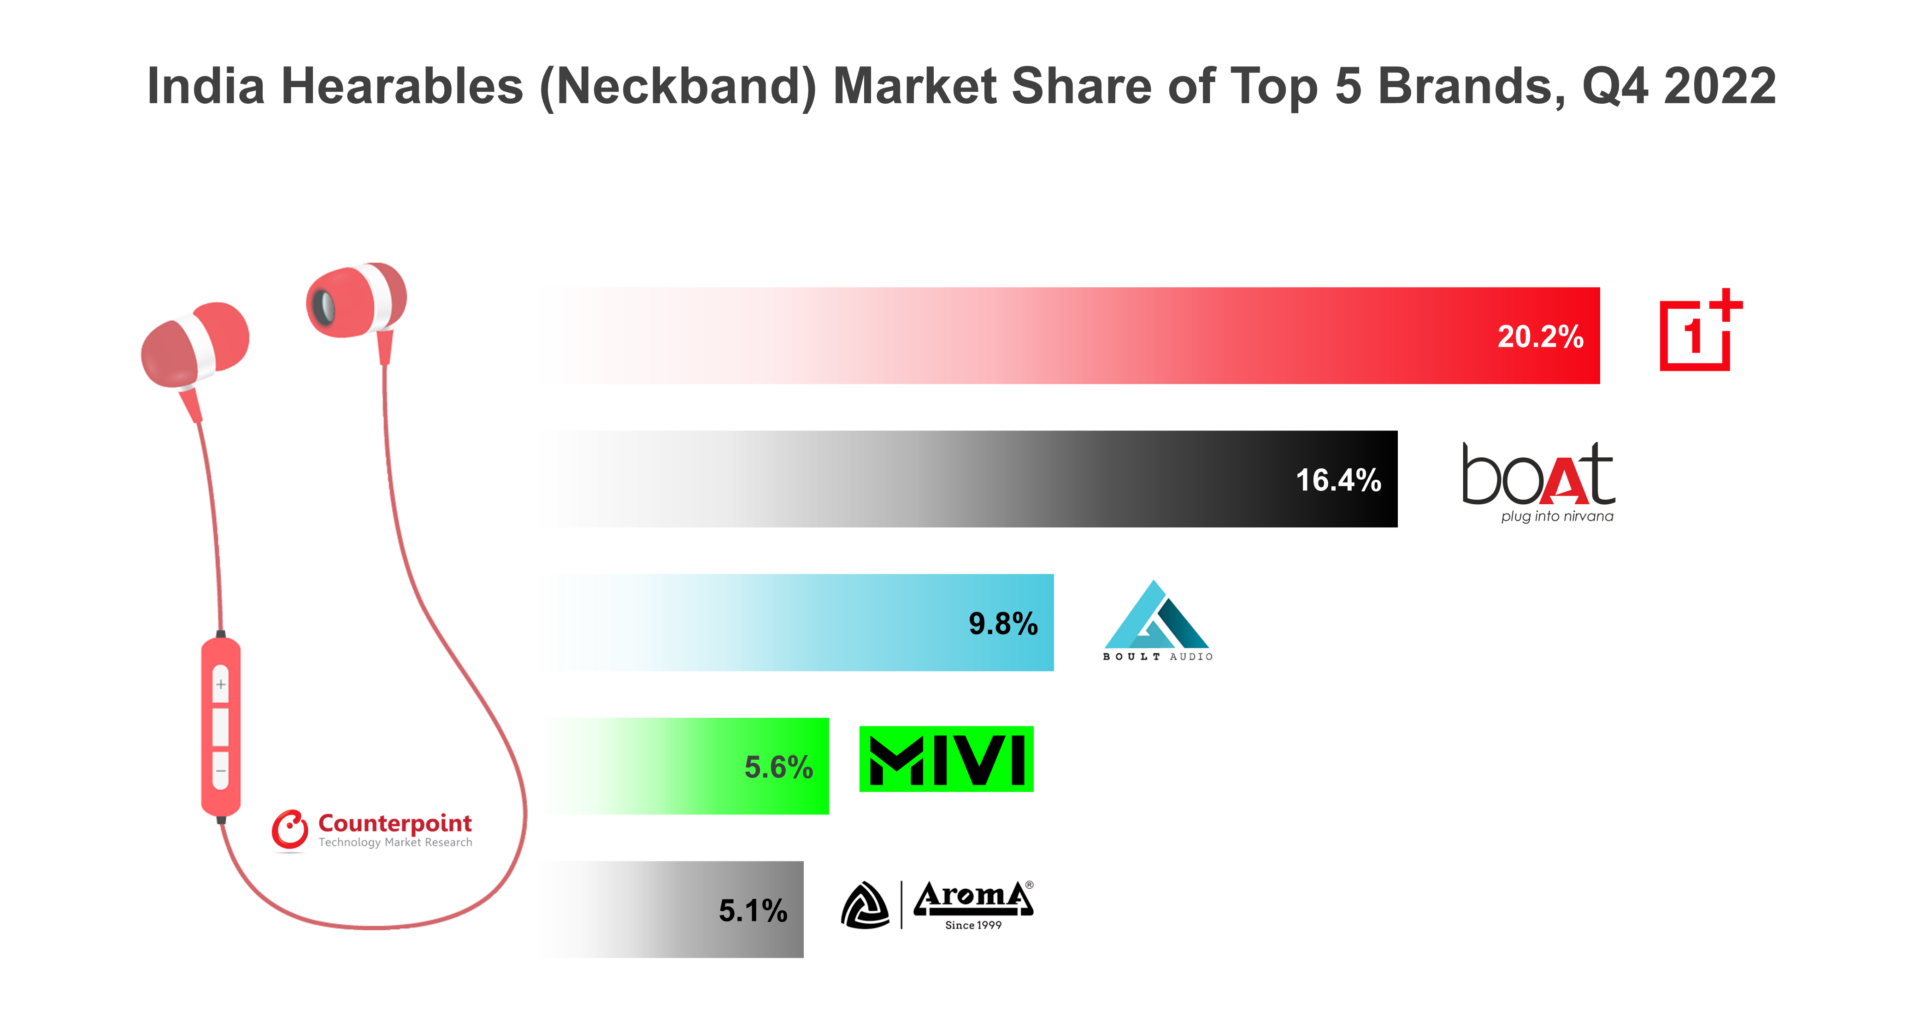 India Neckband (Hearables) Market Share of Top 5 Brands, Q4 2022